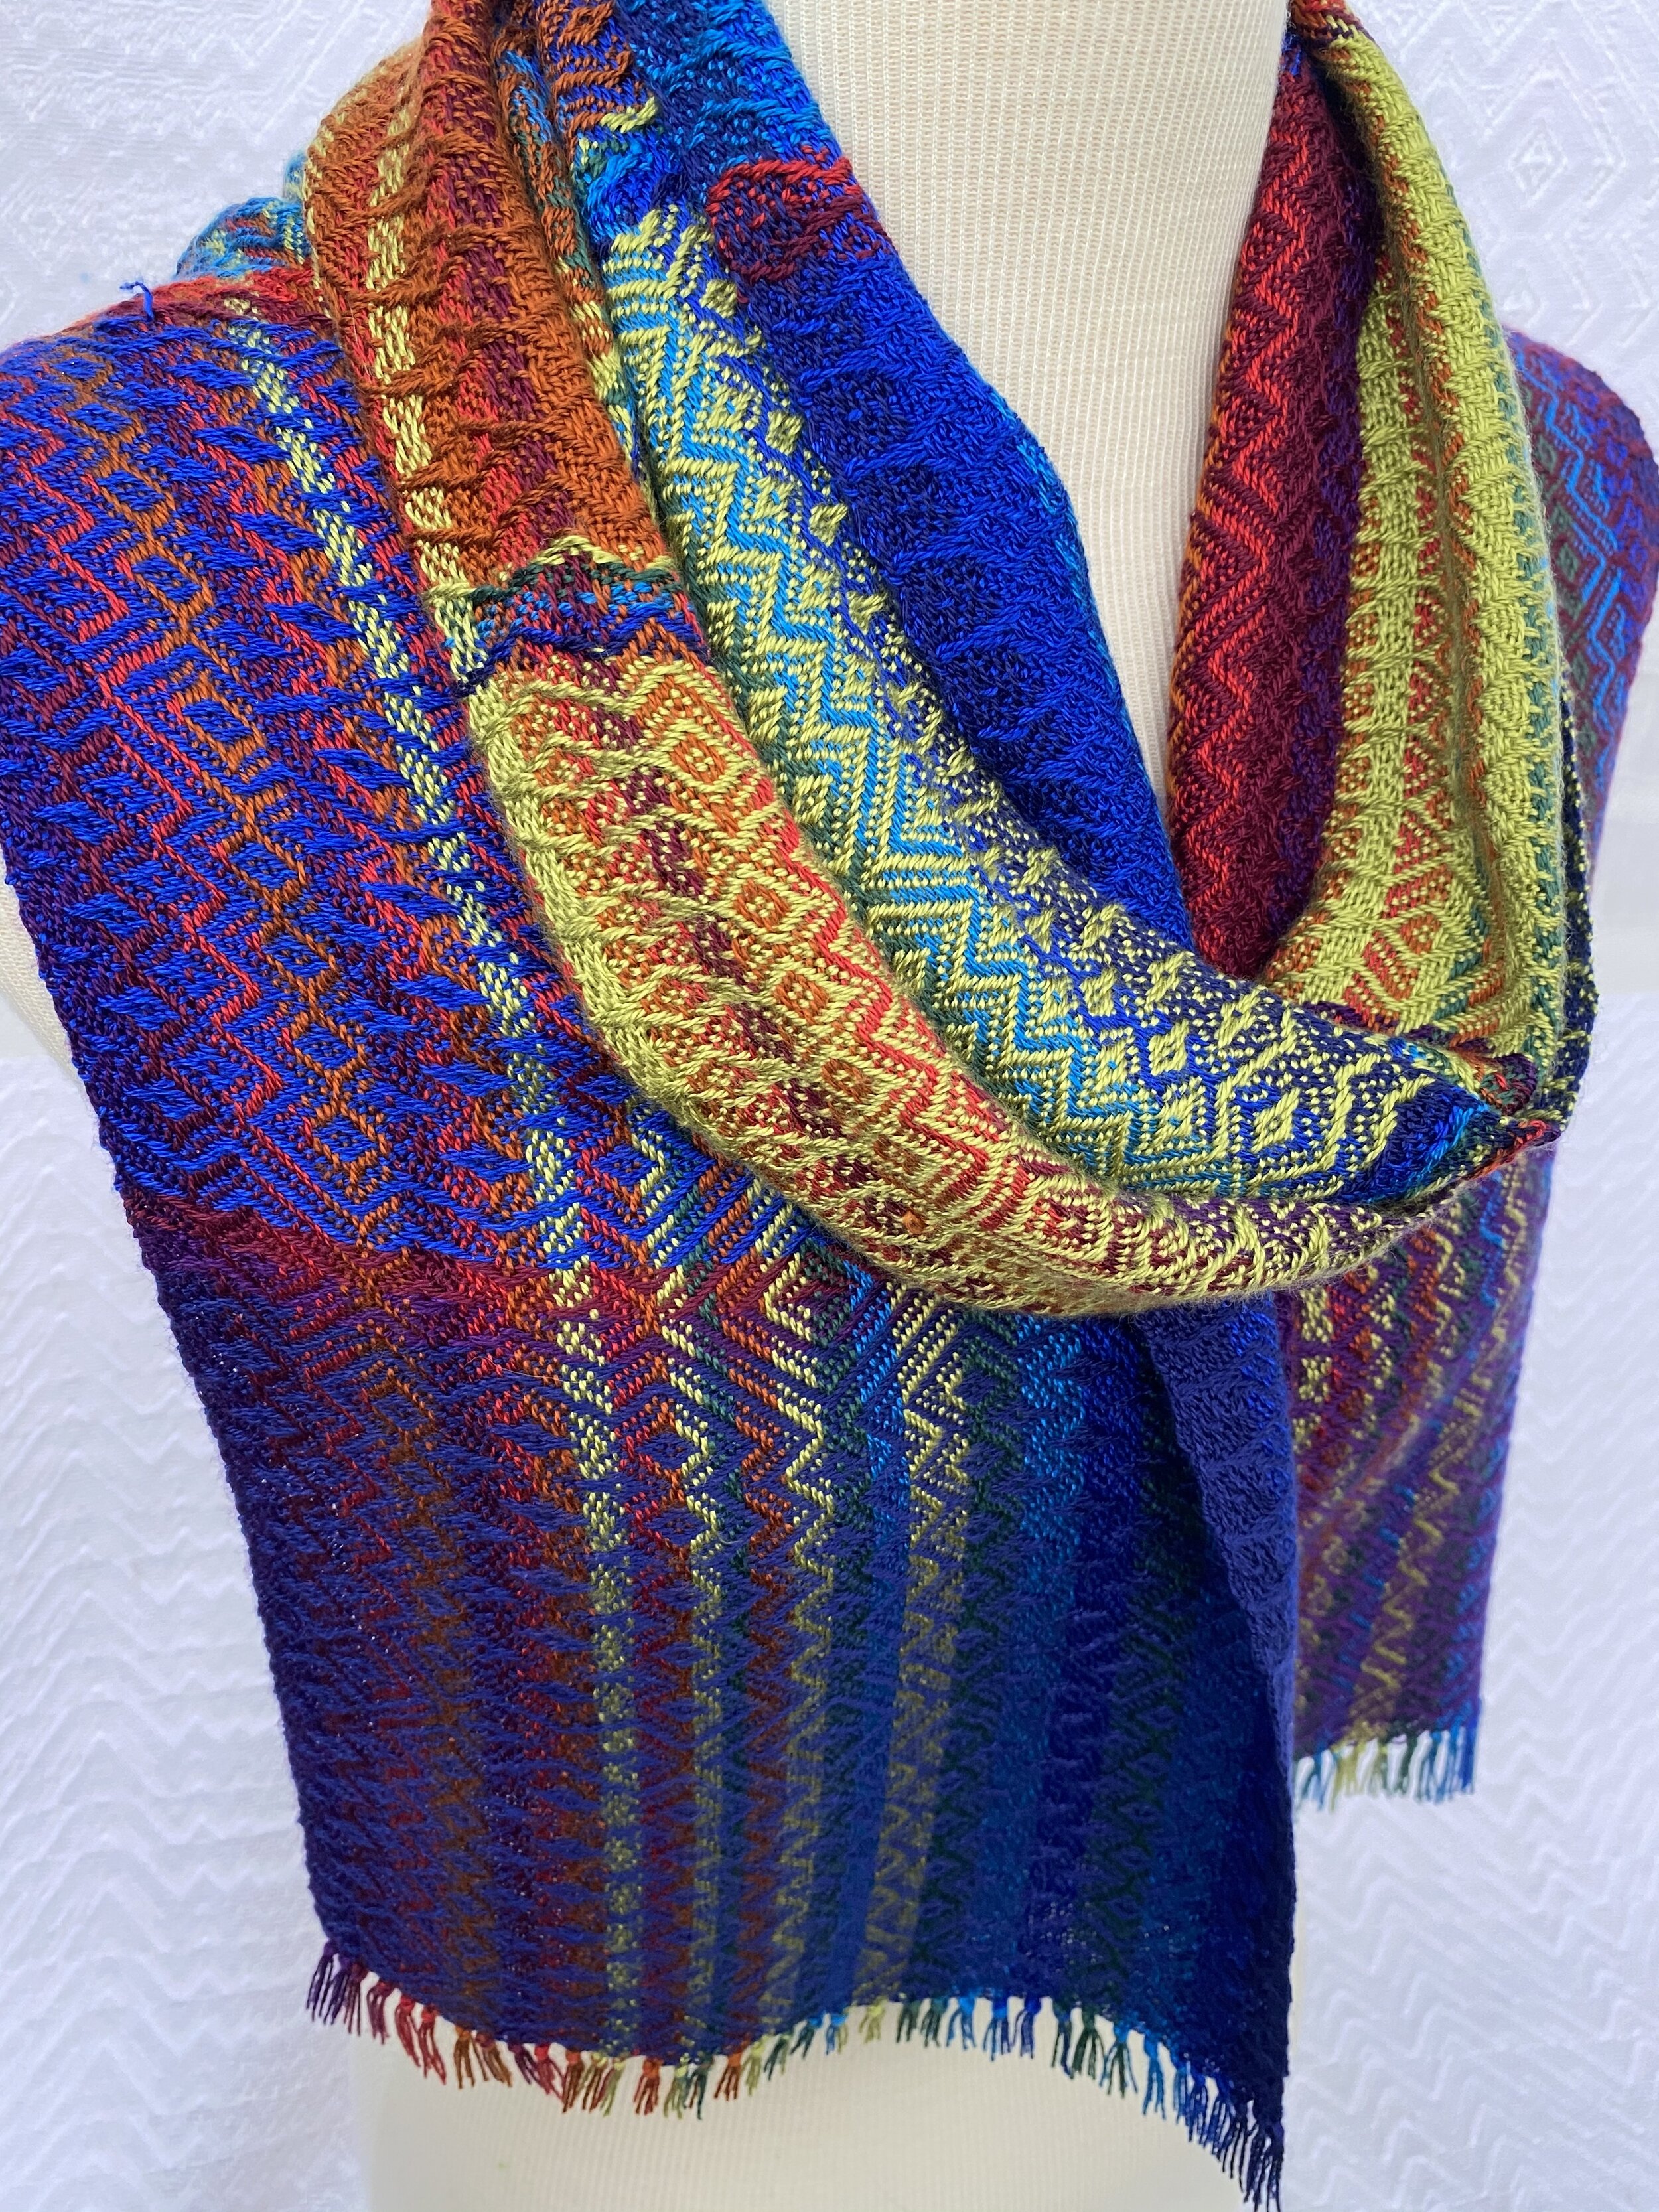  Red, Orange, Green, Blue and Purple Twill Handwoven Scarf       